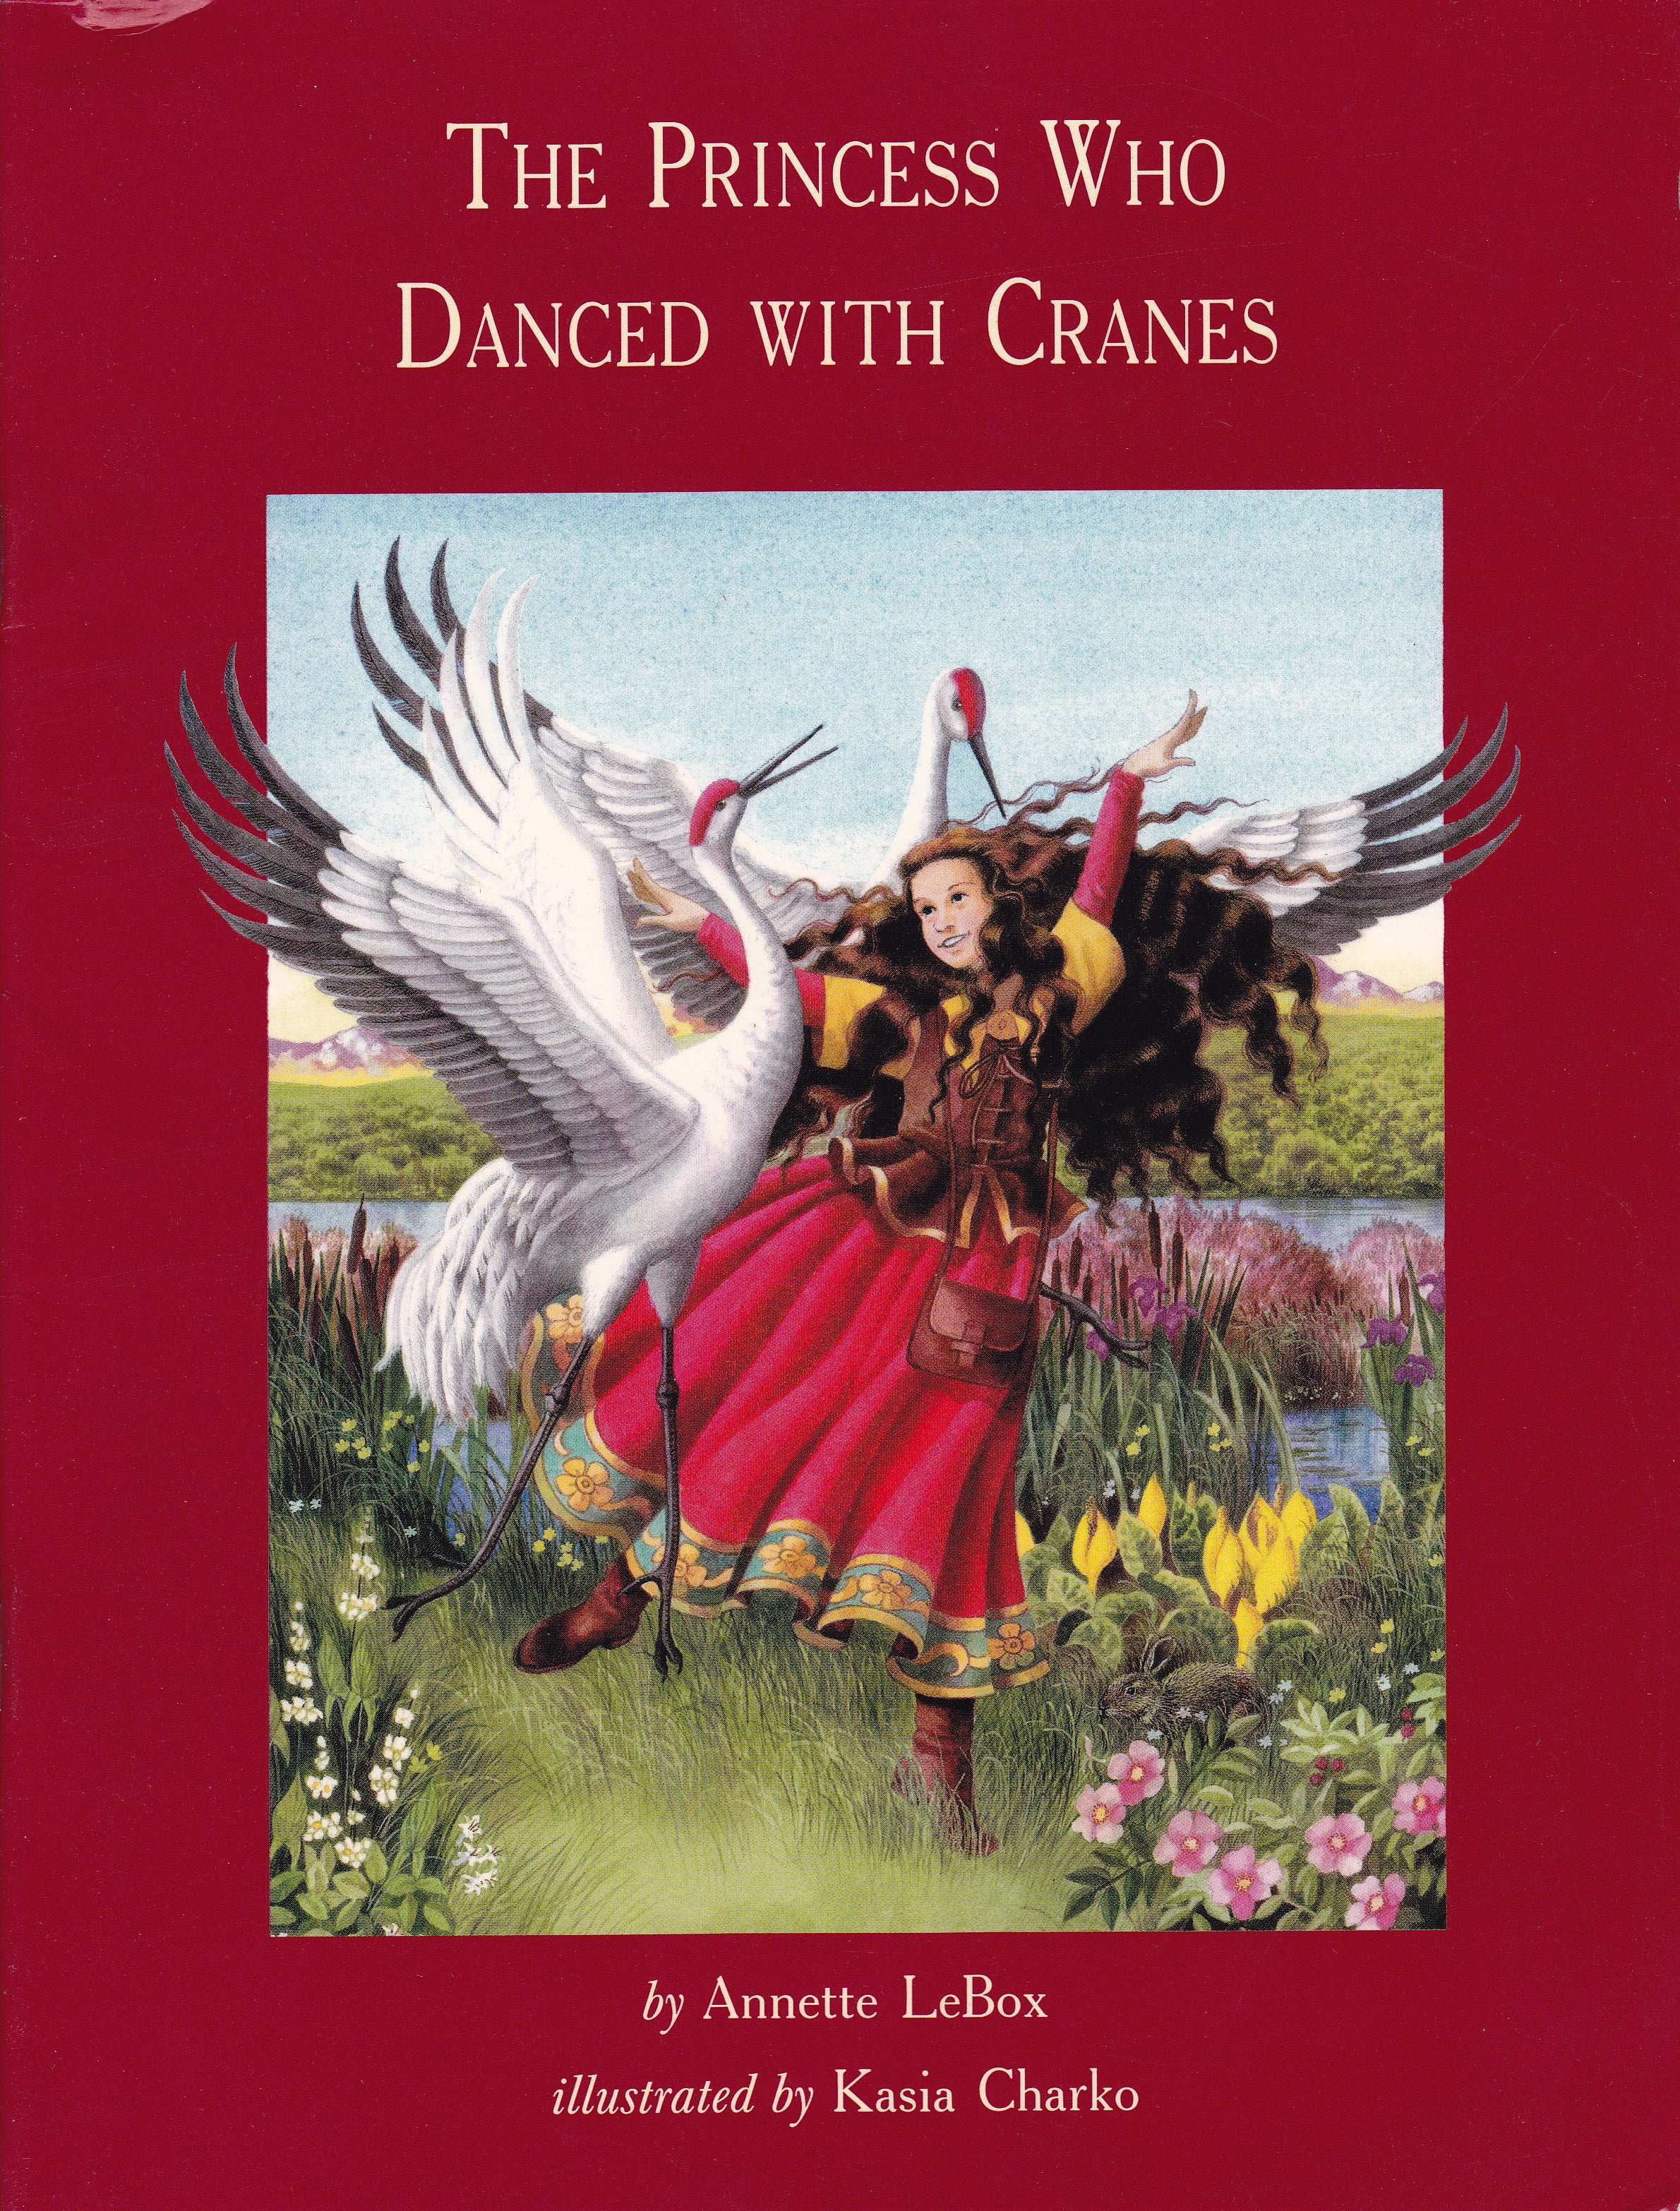 The Princess Who Danced with Cranes